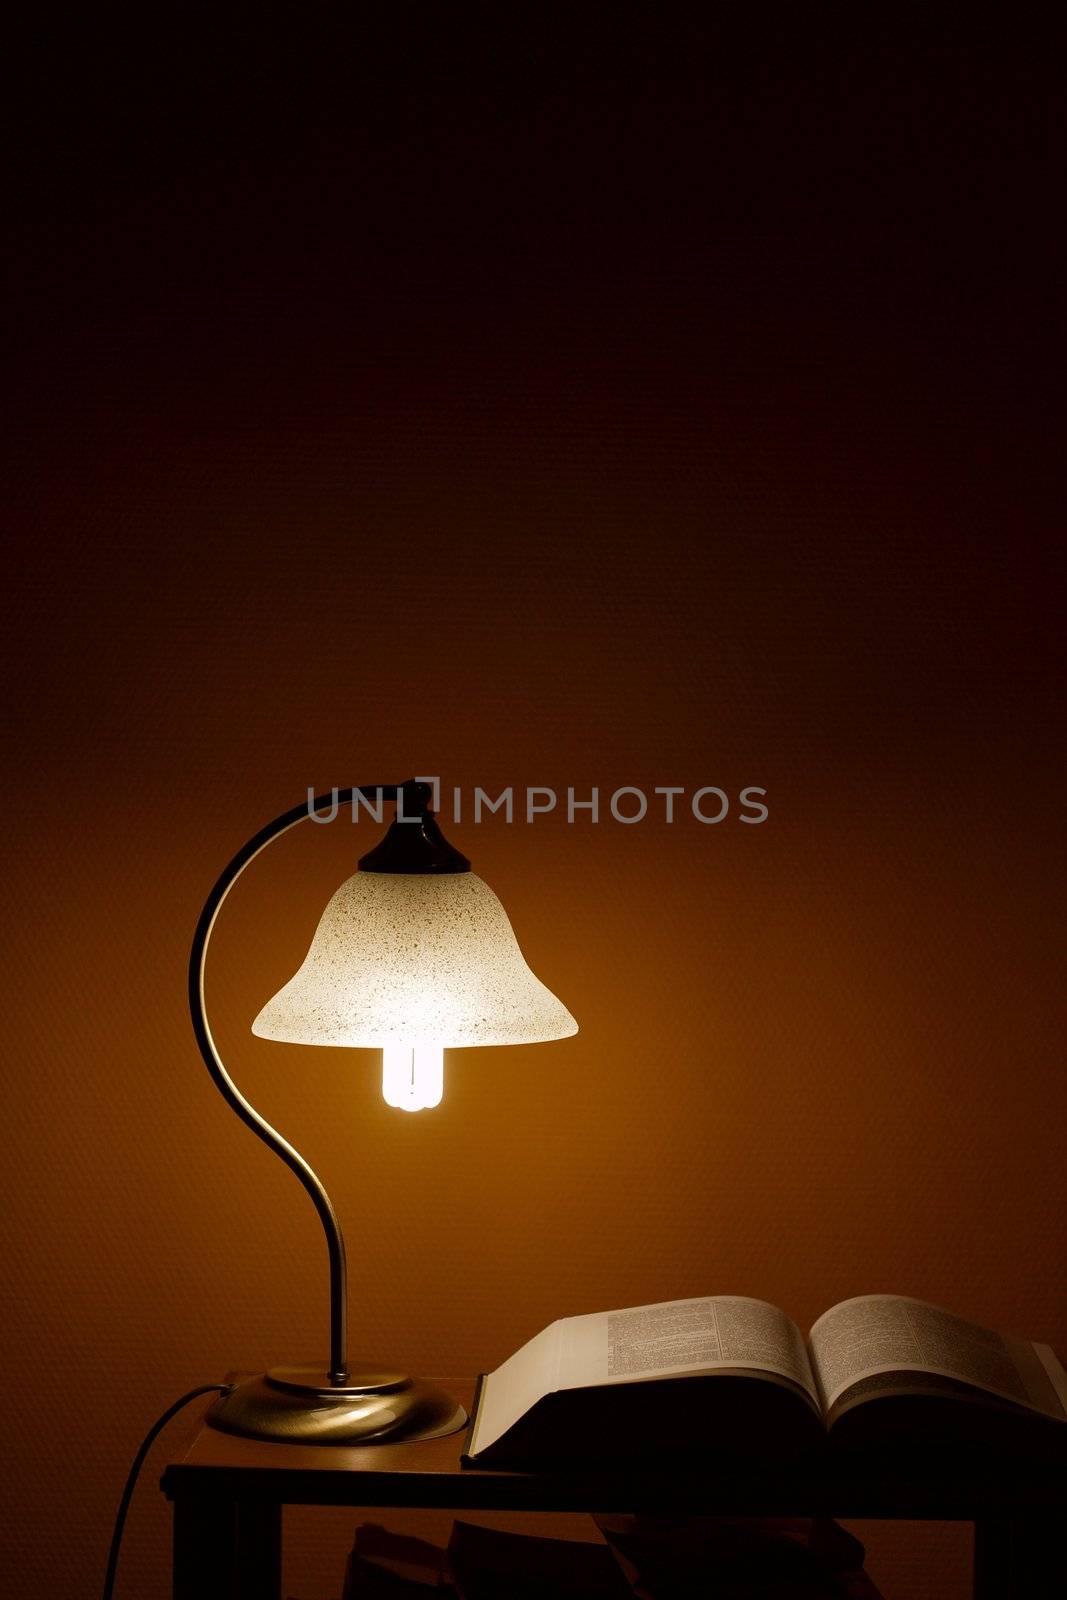 Small lamp illuminating a book in the night